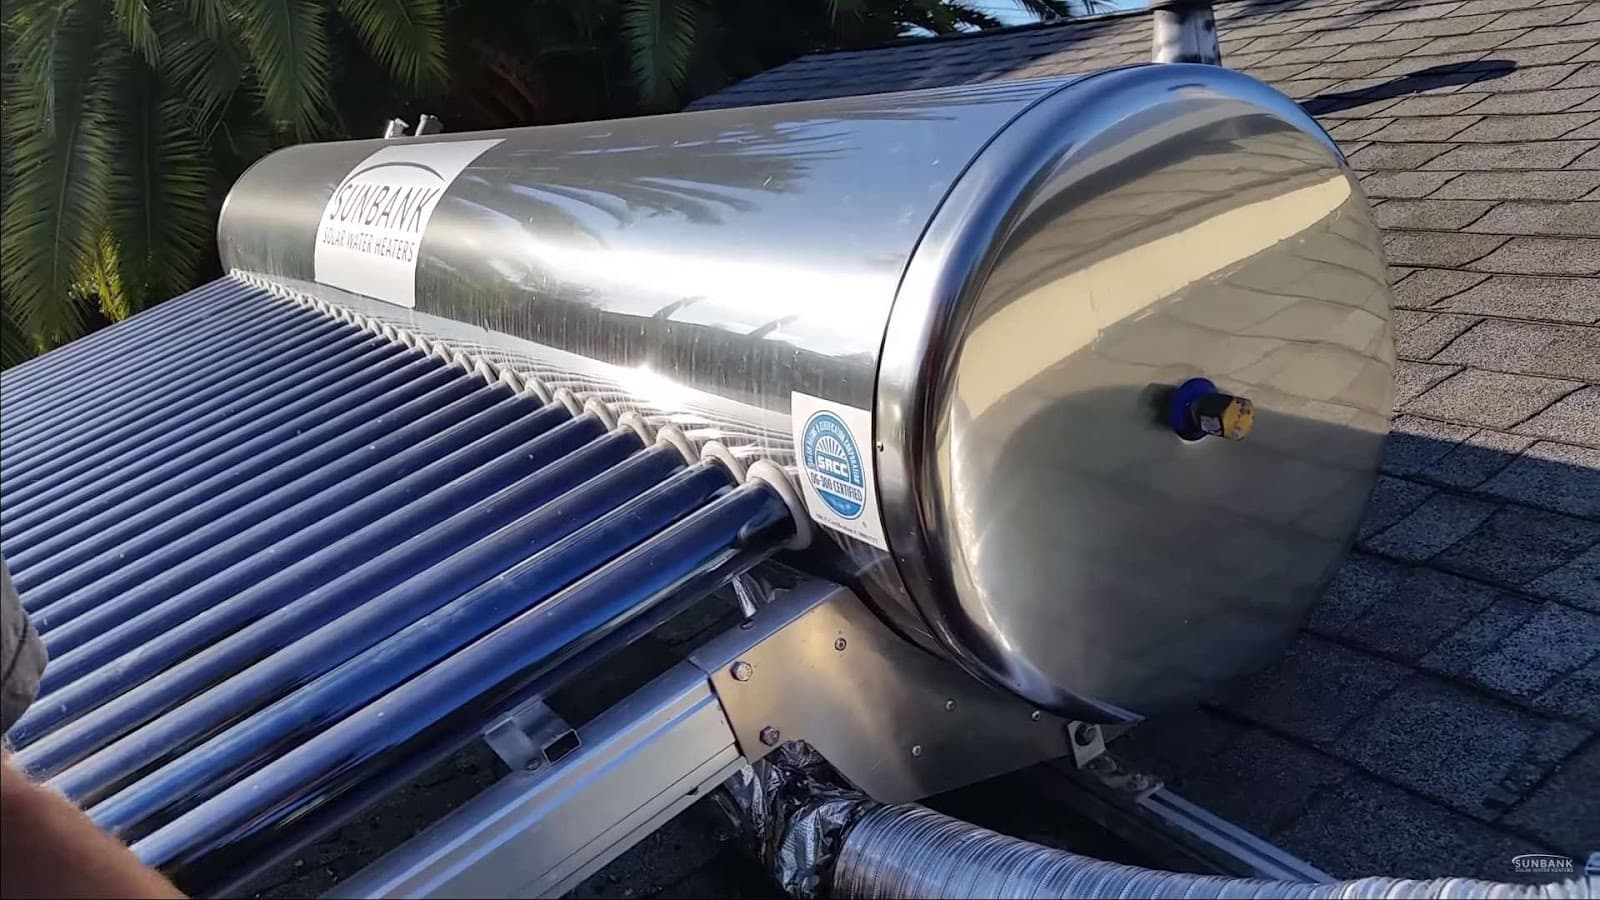 Close up of solar water heating system